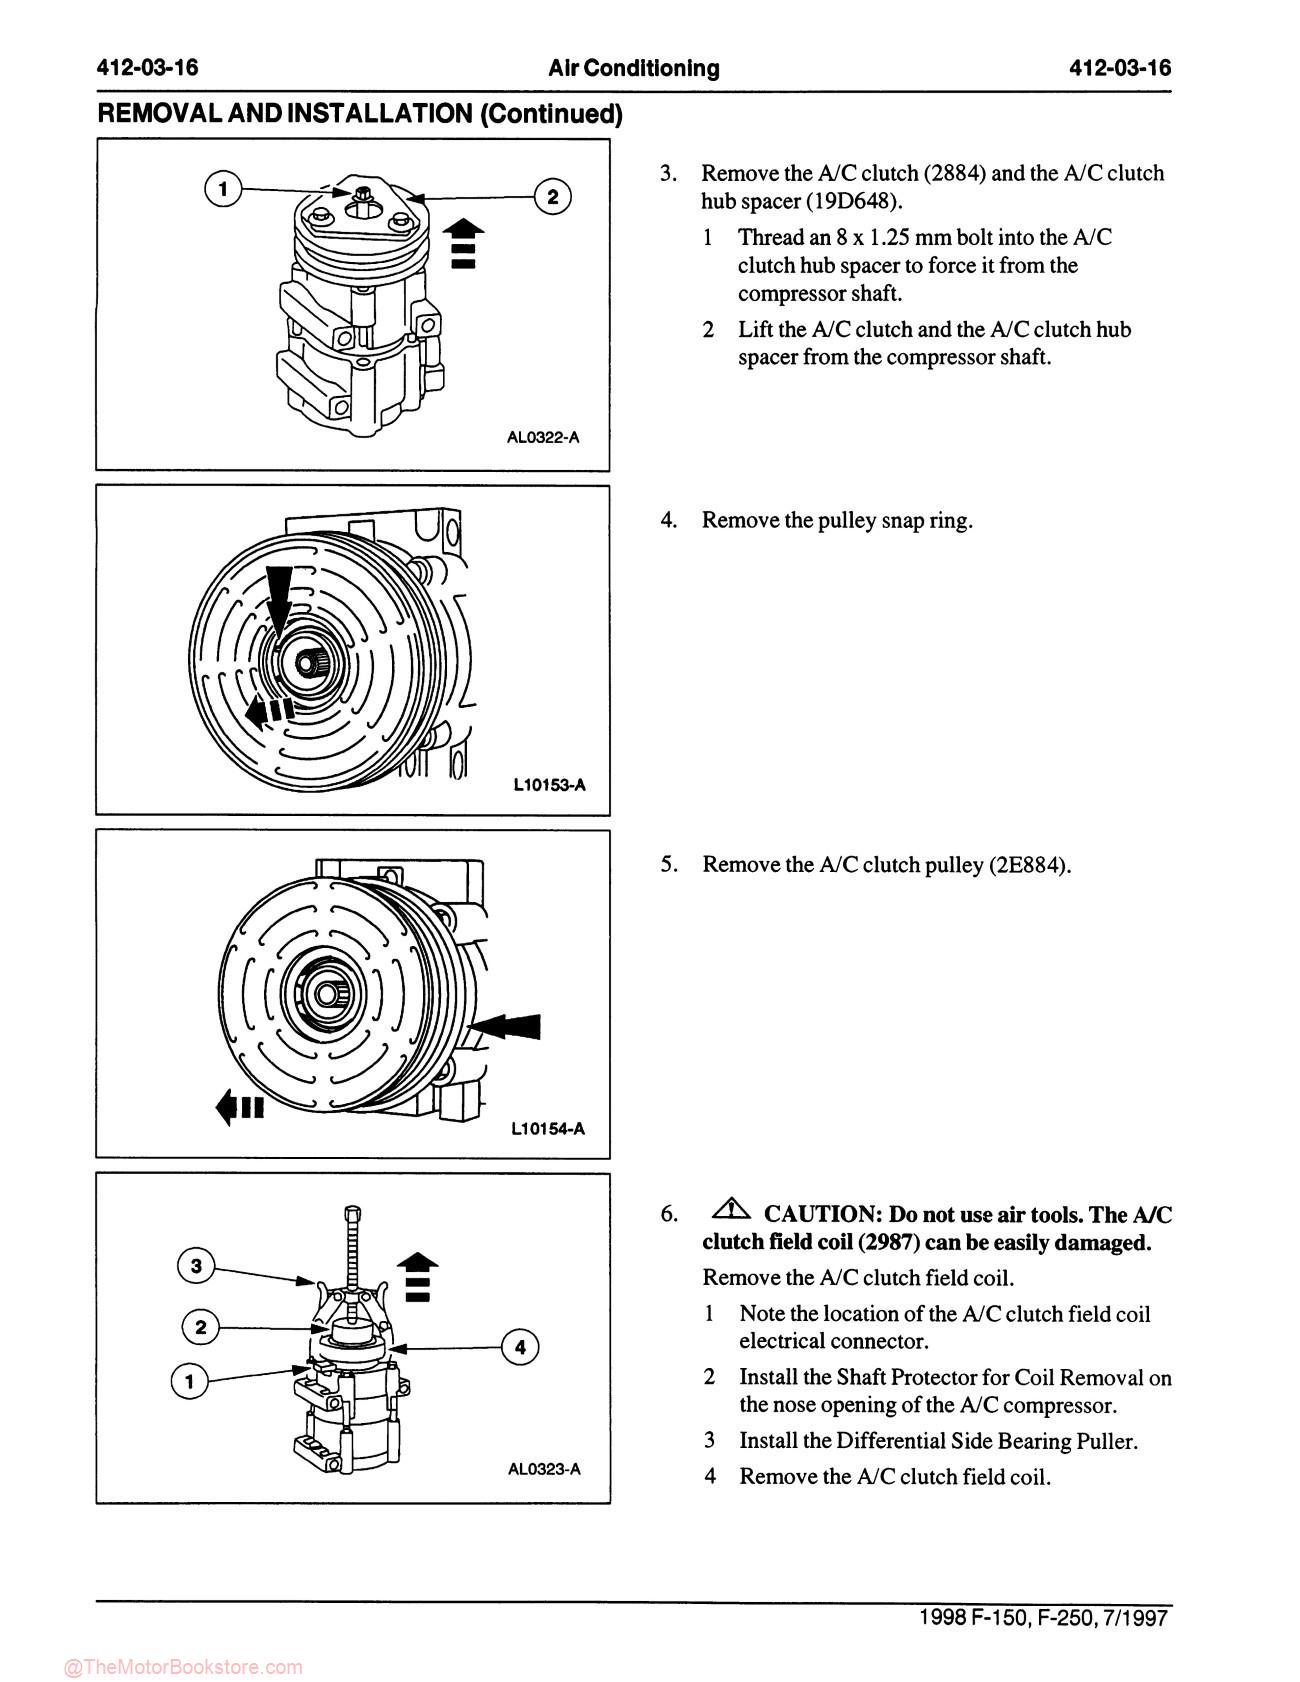 1998 Ford F-150, F-250 Truck Workshop Manual - Sample Page 2